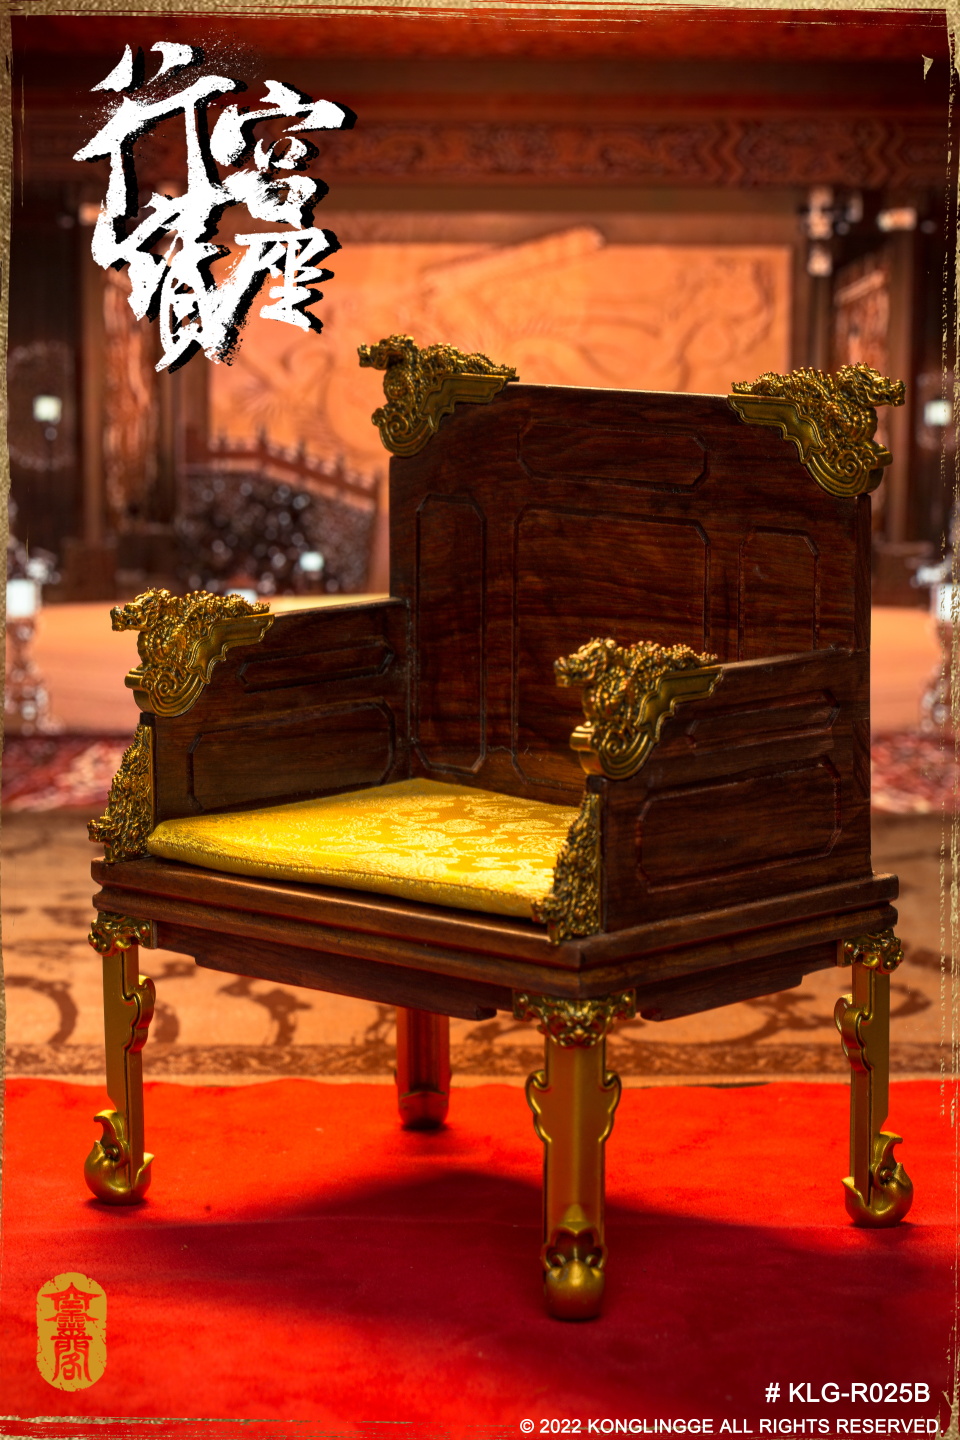 MingShenzong - NEW PRODUCT: Konglingge Pavilion: 1/6 Ming Shenzong [Court Edition] Limited to 350 pieces (#KLG-R025A/B) 69628210